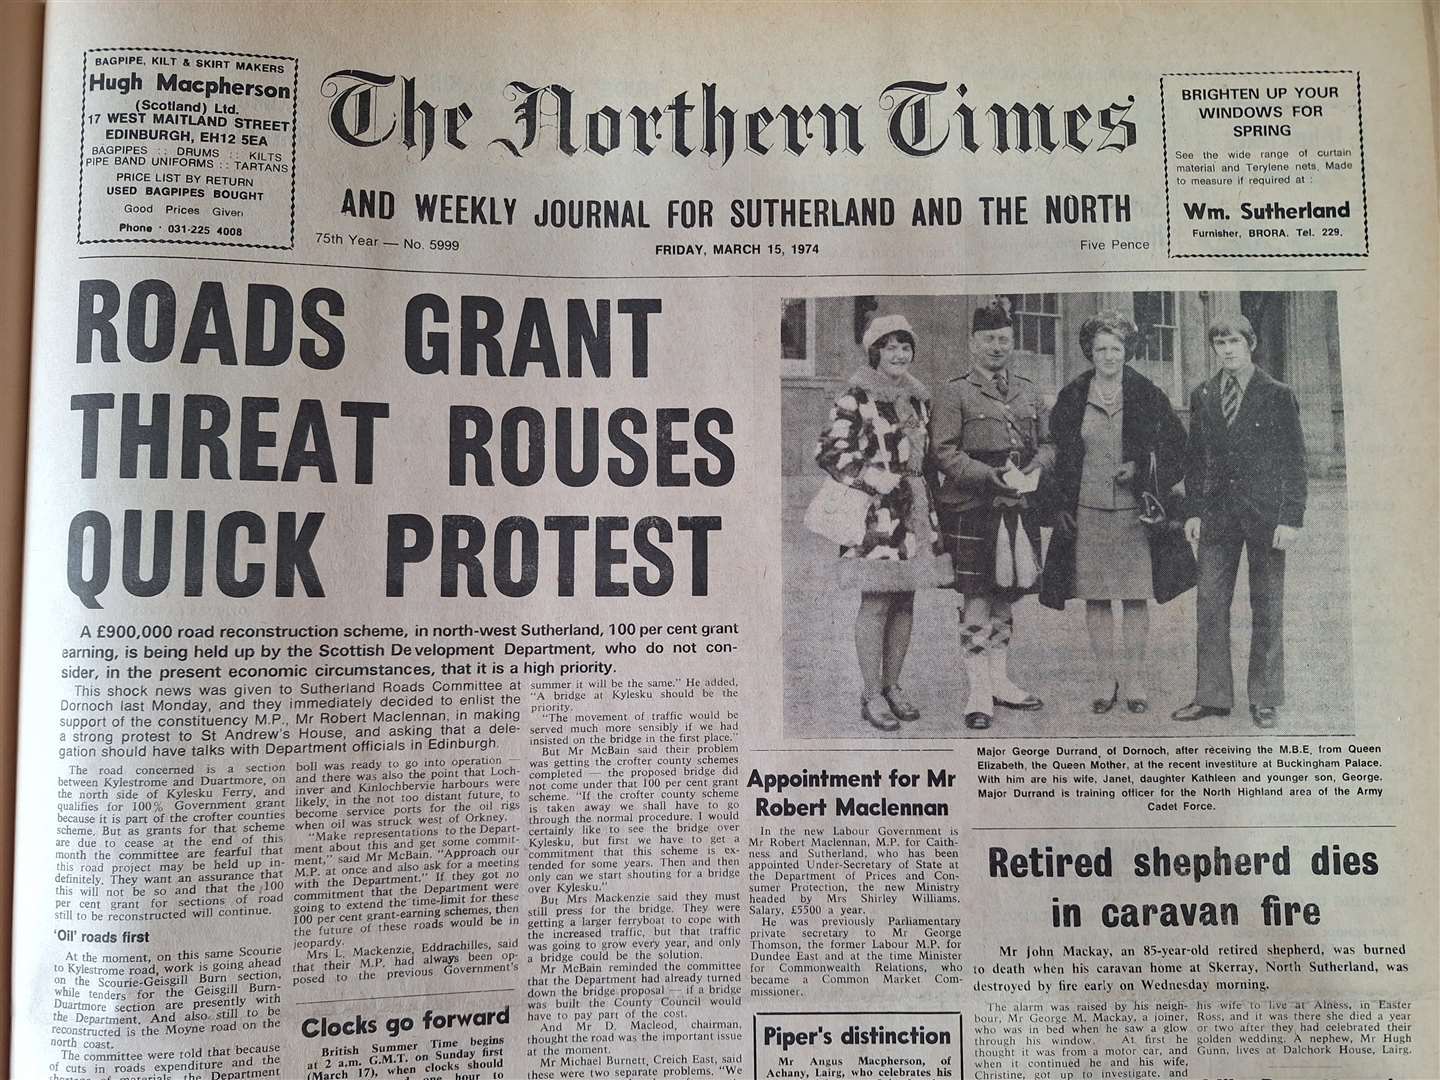 The edition of March 15, 1974.